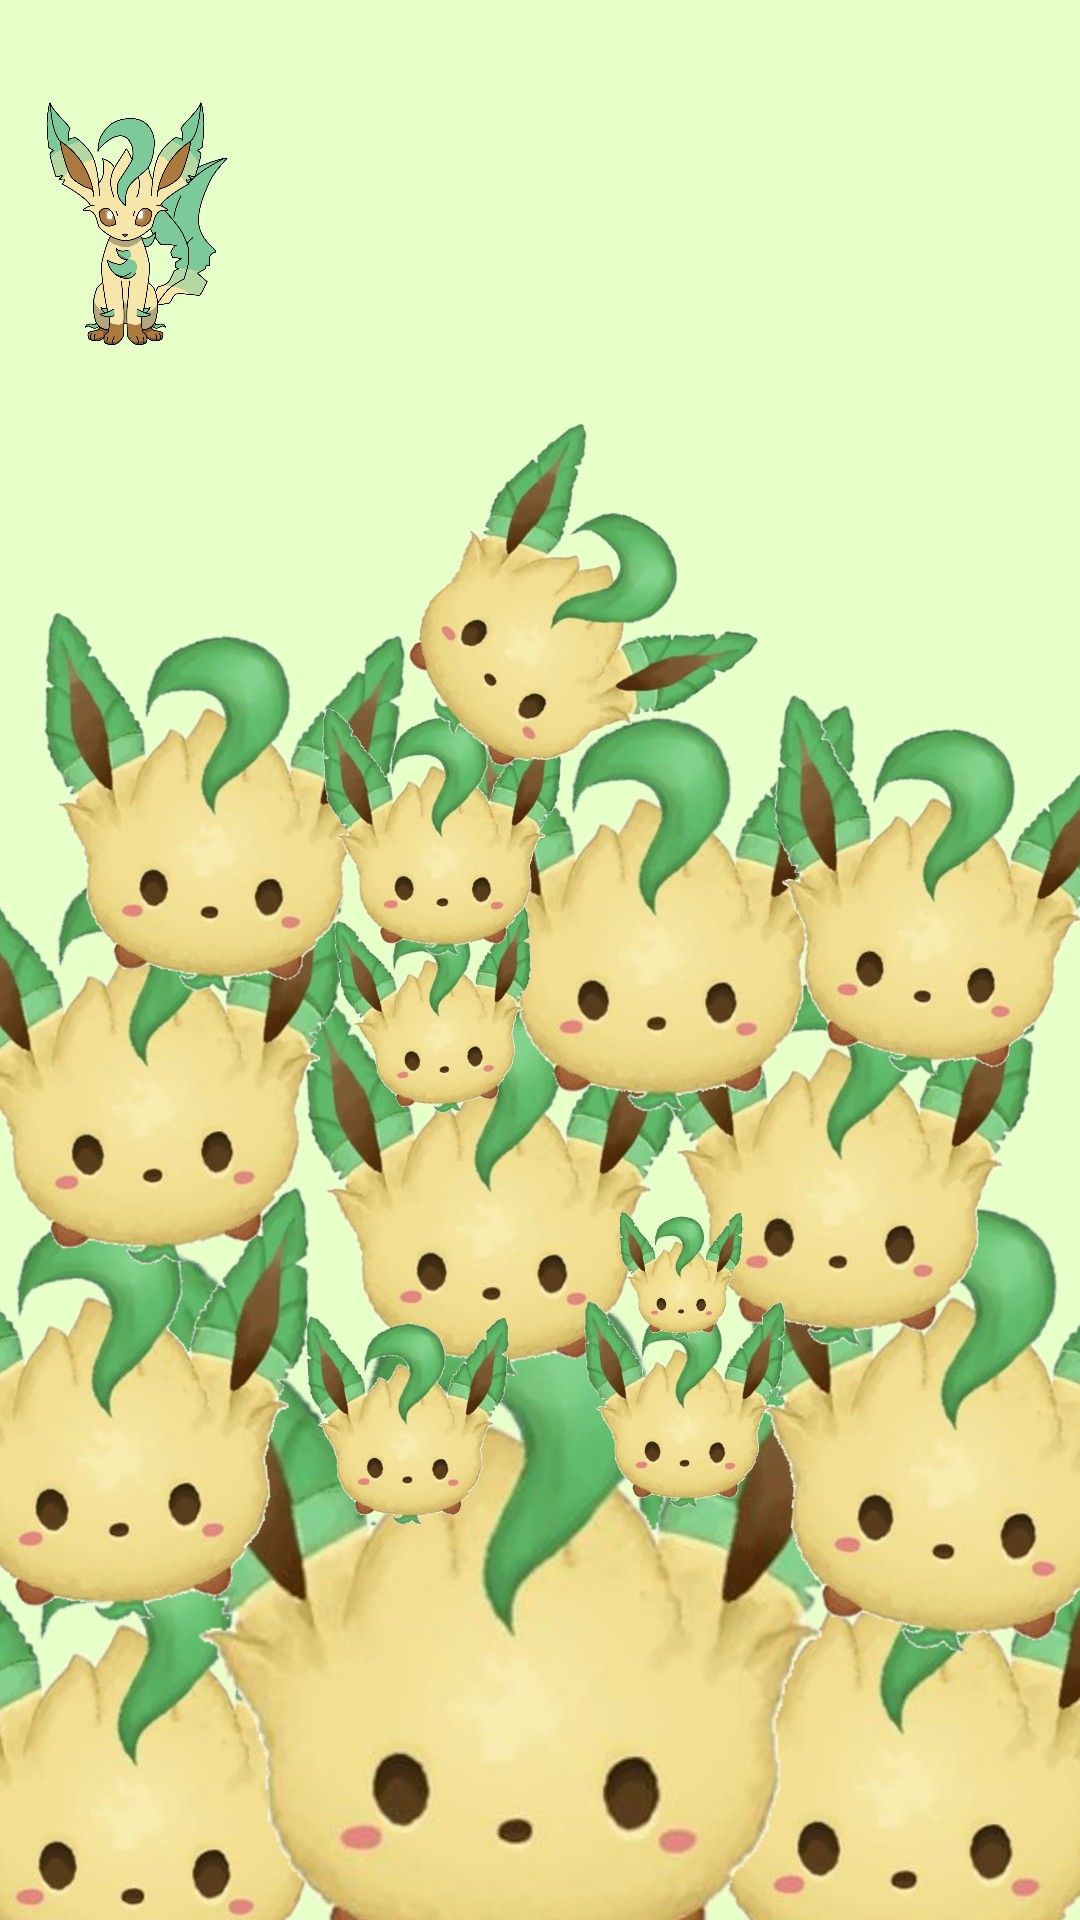 Leafeon Wallpaper 54 Download 4k Wallpapers For Free - Cartoon , HD Wallpaper & Backgrounds